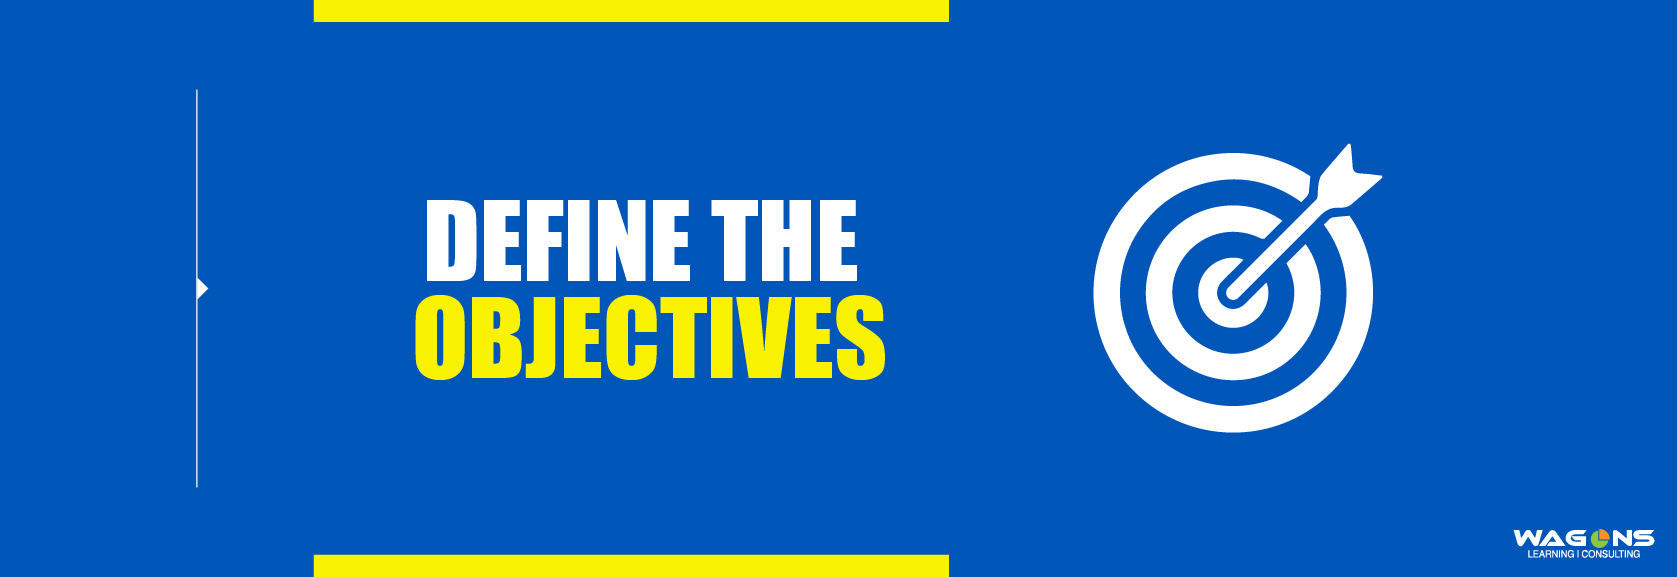 Define the Objectives